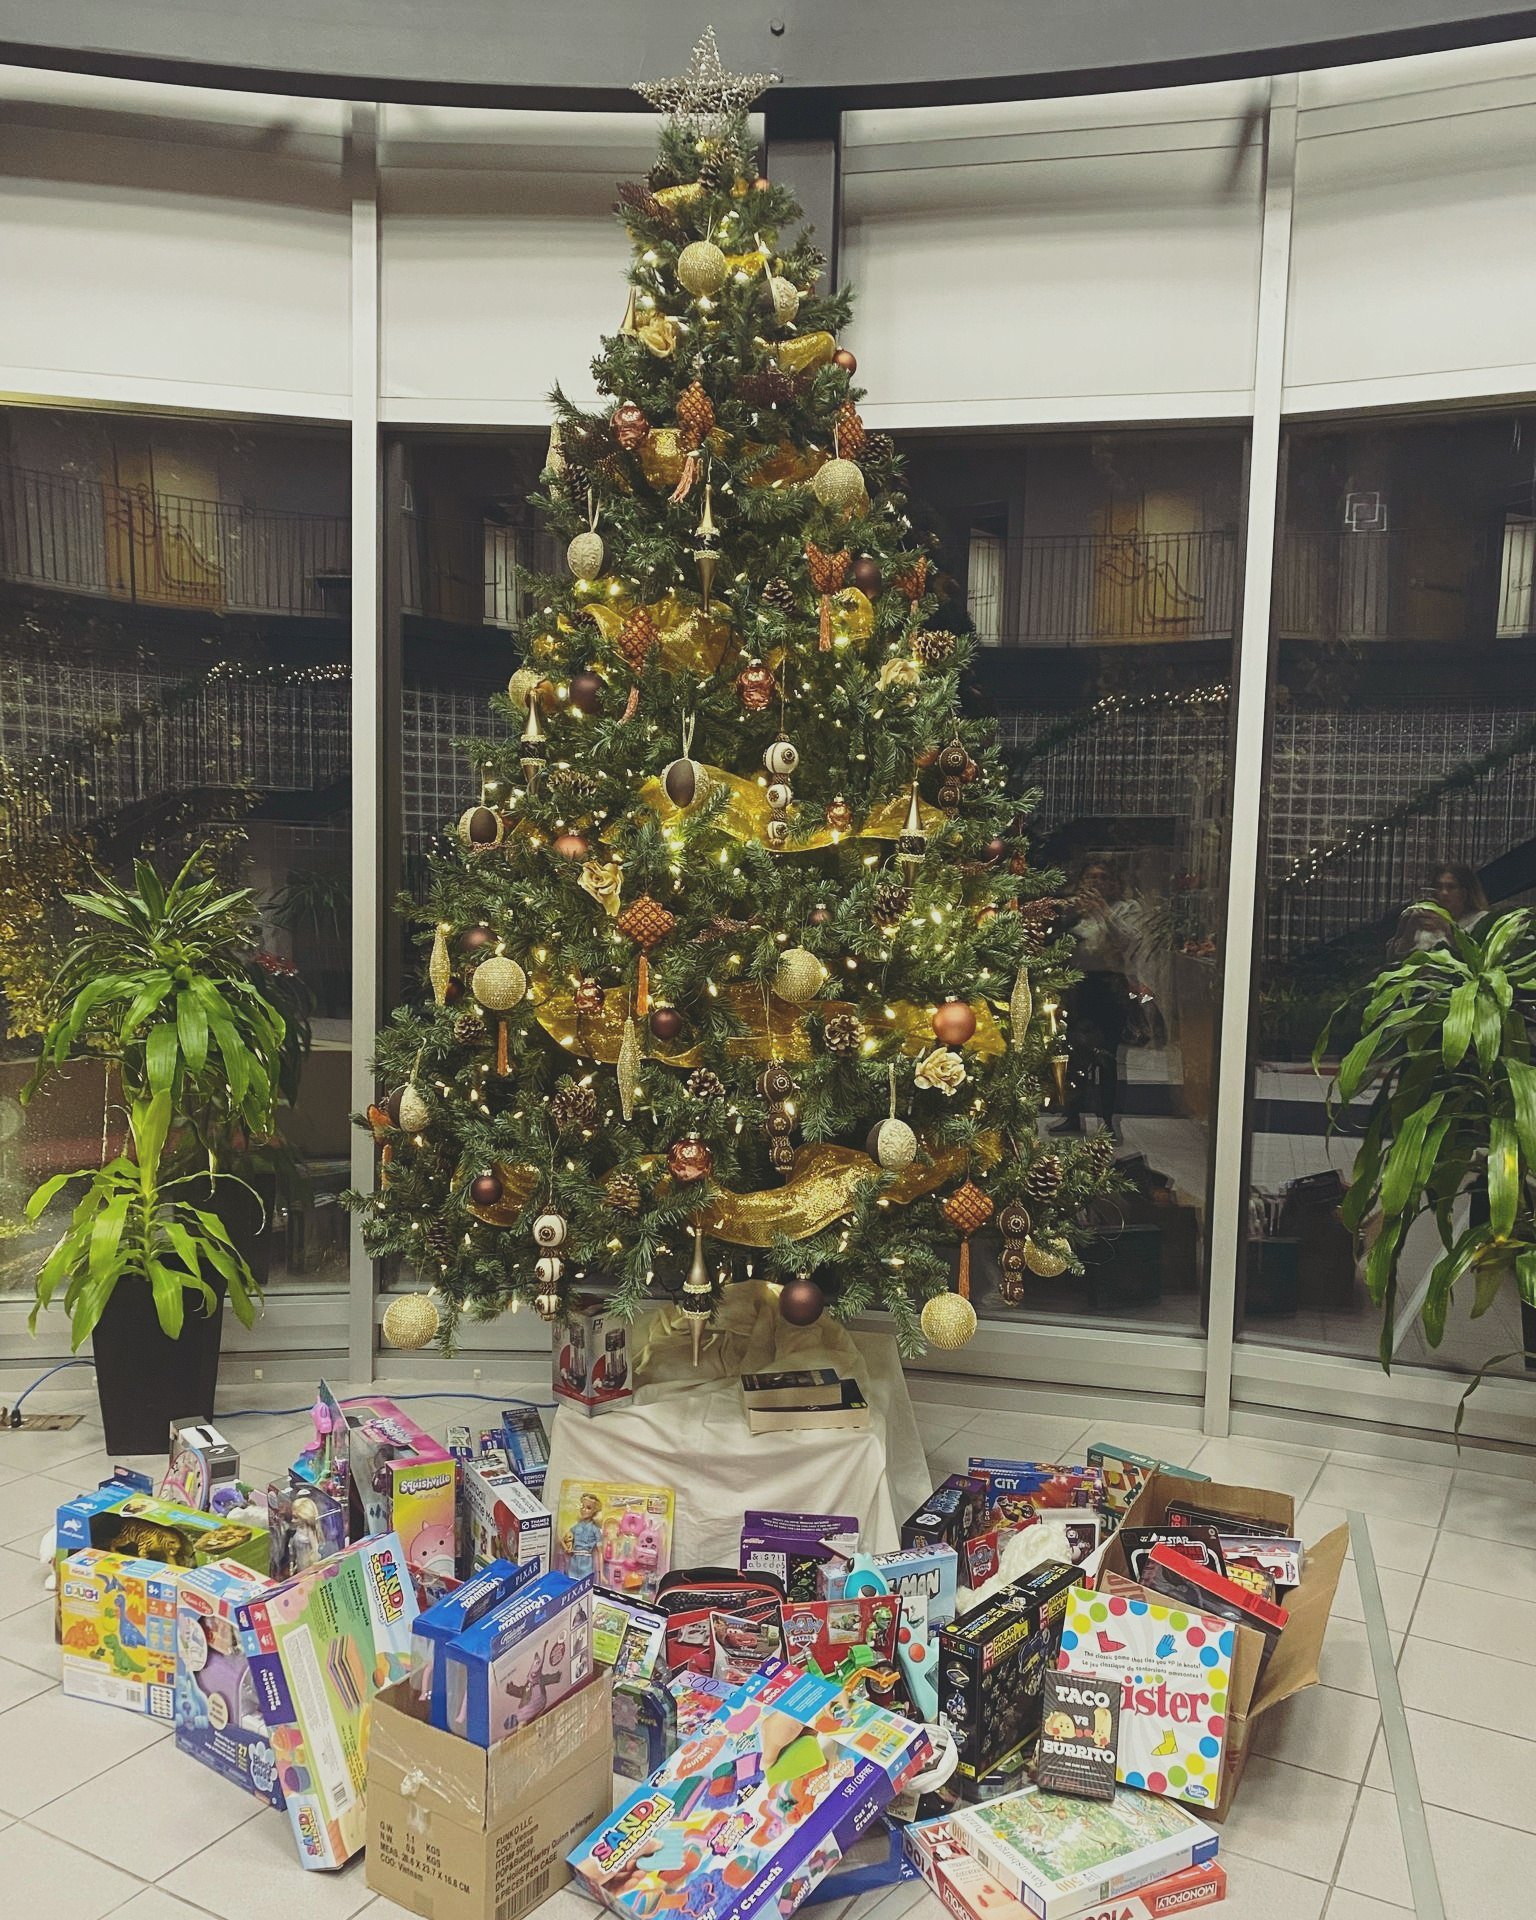 We want to wish our customers, partners, and colleagues a happy holiday season! This year over the month of December Brock hosted a toy drive in support of @ctvtoymountain to help make holiday wishes come true for children across our local regions.  We look forward to getting together in the New Year and continuing to support our community! #LifeAtBrock